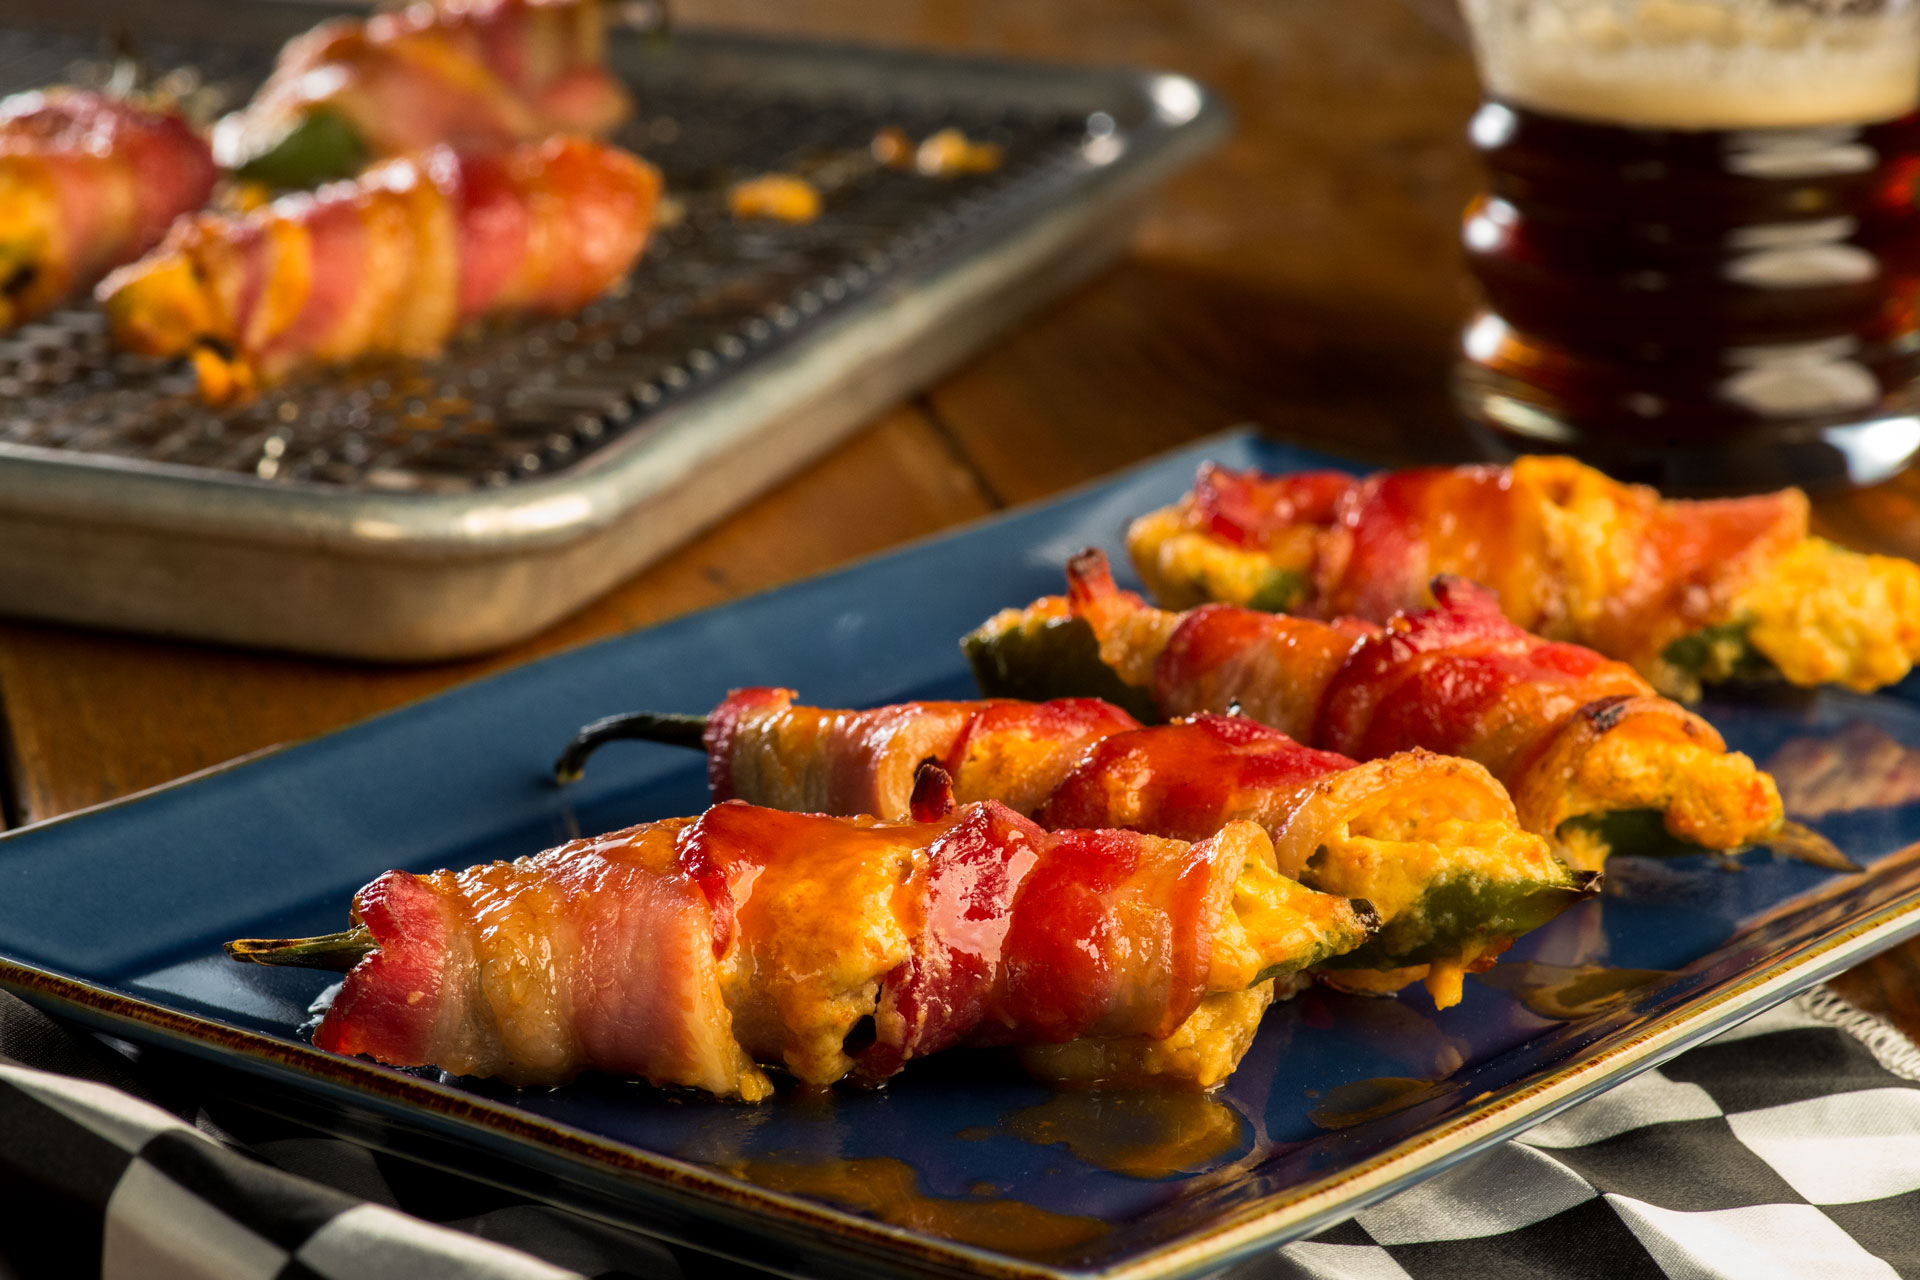 These peppers are insanely delicious. Packed full of sweet and savory flavor, finishing off with a spicy note, this is the perfect snack for your watch party. 